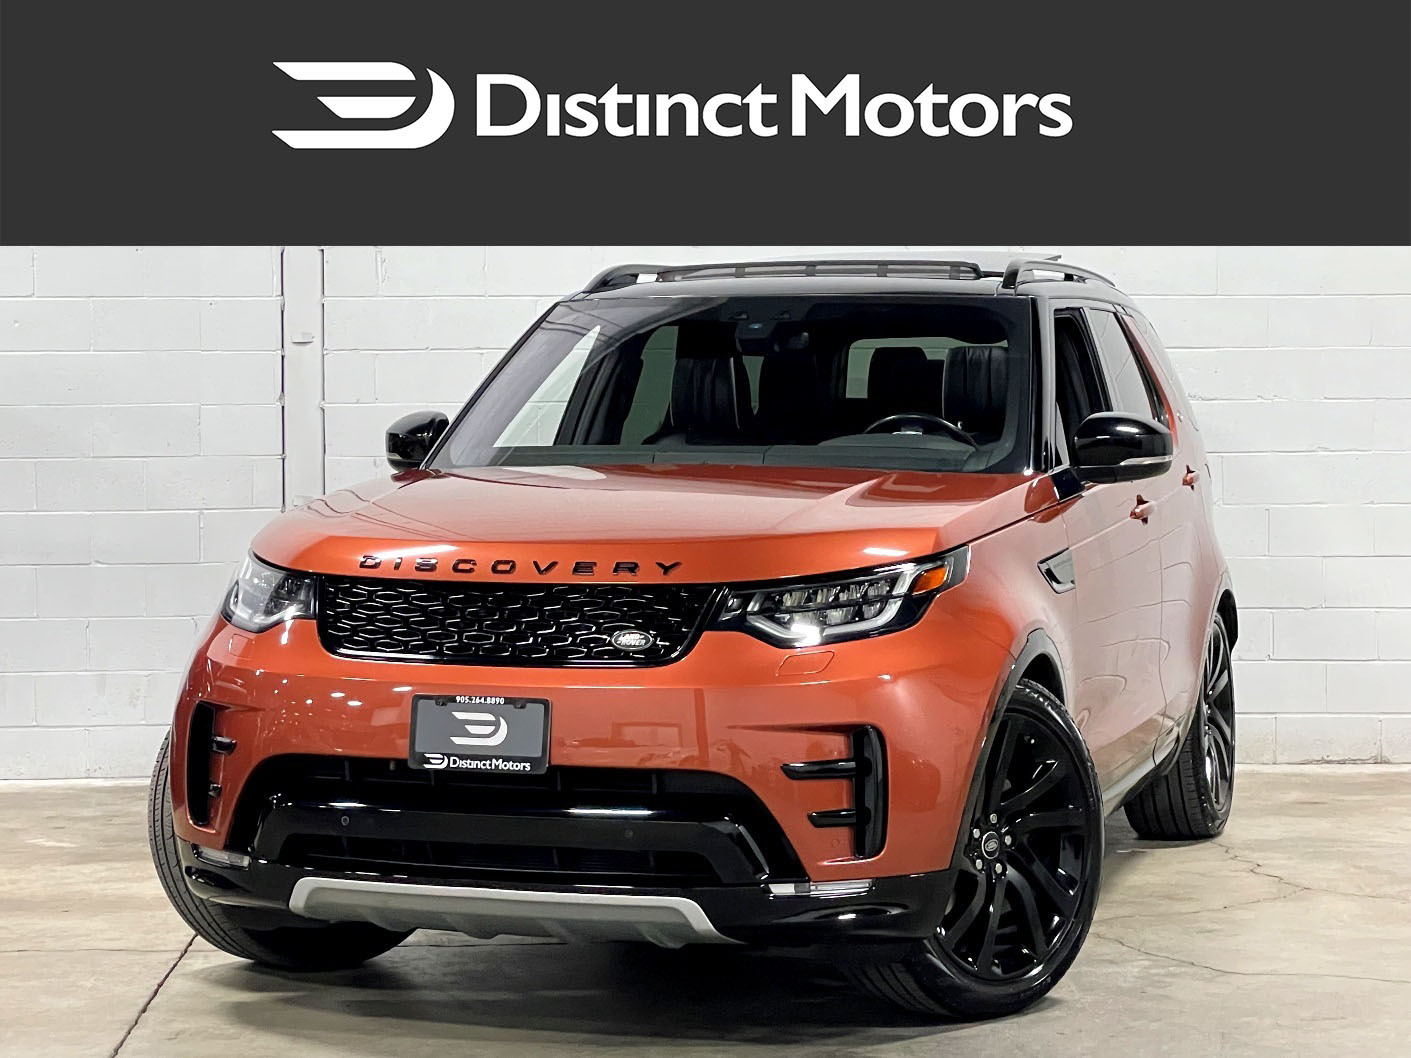 2018 Land Rover Discovery  TD6,DYNAMIC,HSE LUXURY,VENTED & MASSAGE SEATS